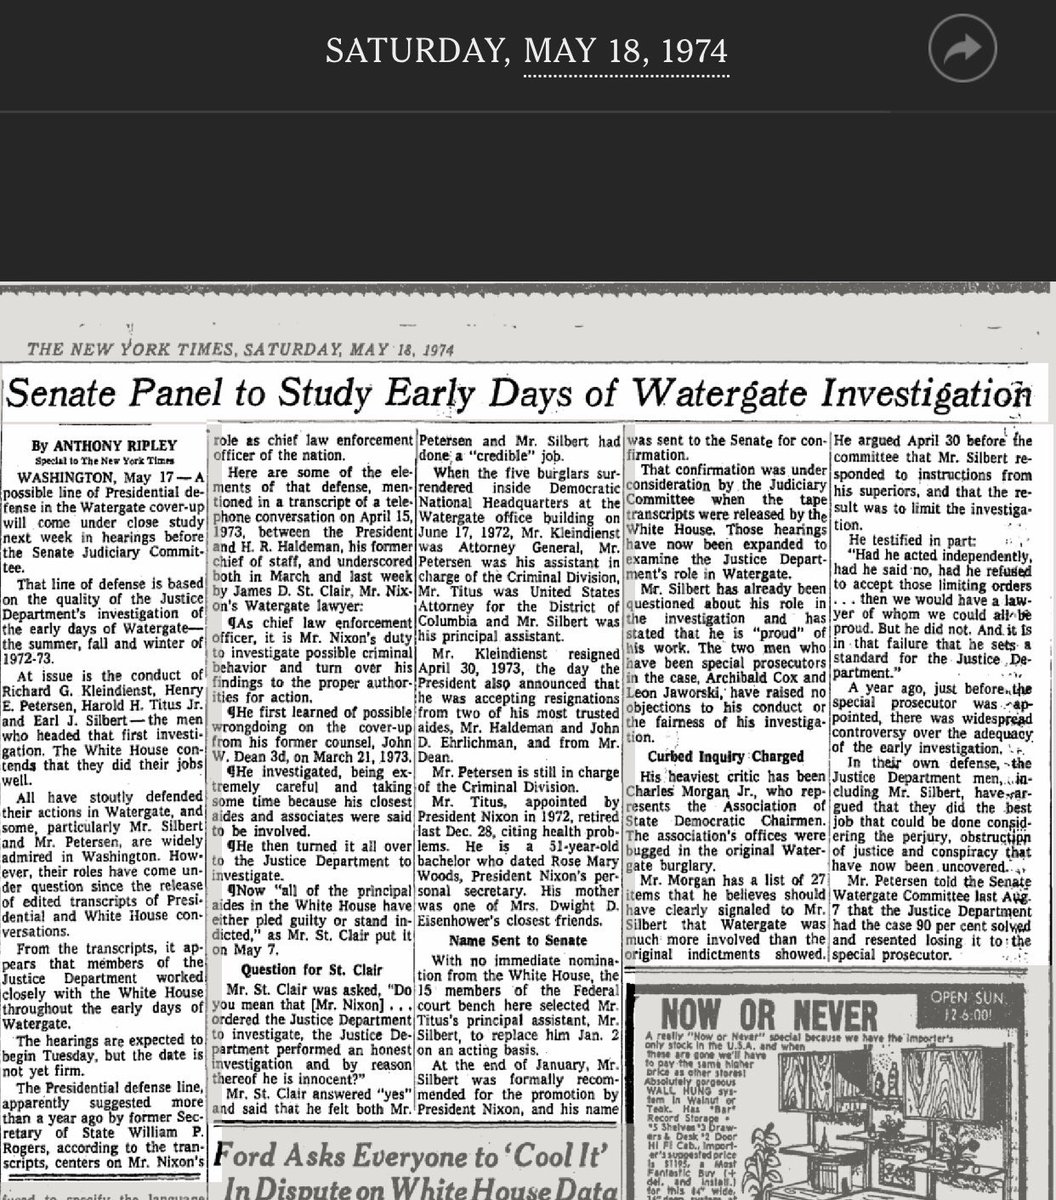 New York Times, 50 years ago today, 5/18/74

History repeats. Except in 1974 there was bi-partisan agreement to get the full truth. 

“Senate Panel to Study Early Days of Watergate Investigation”

80 days later, Nixon was gone after ignoring subpoenas and saying “Witch Hunt!”